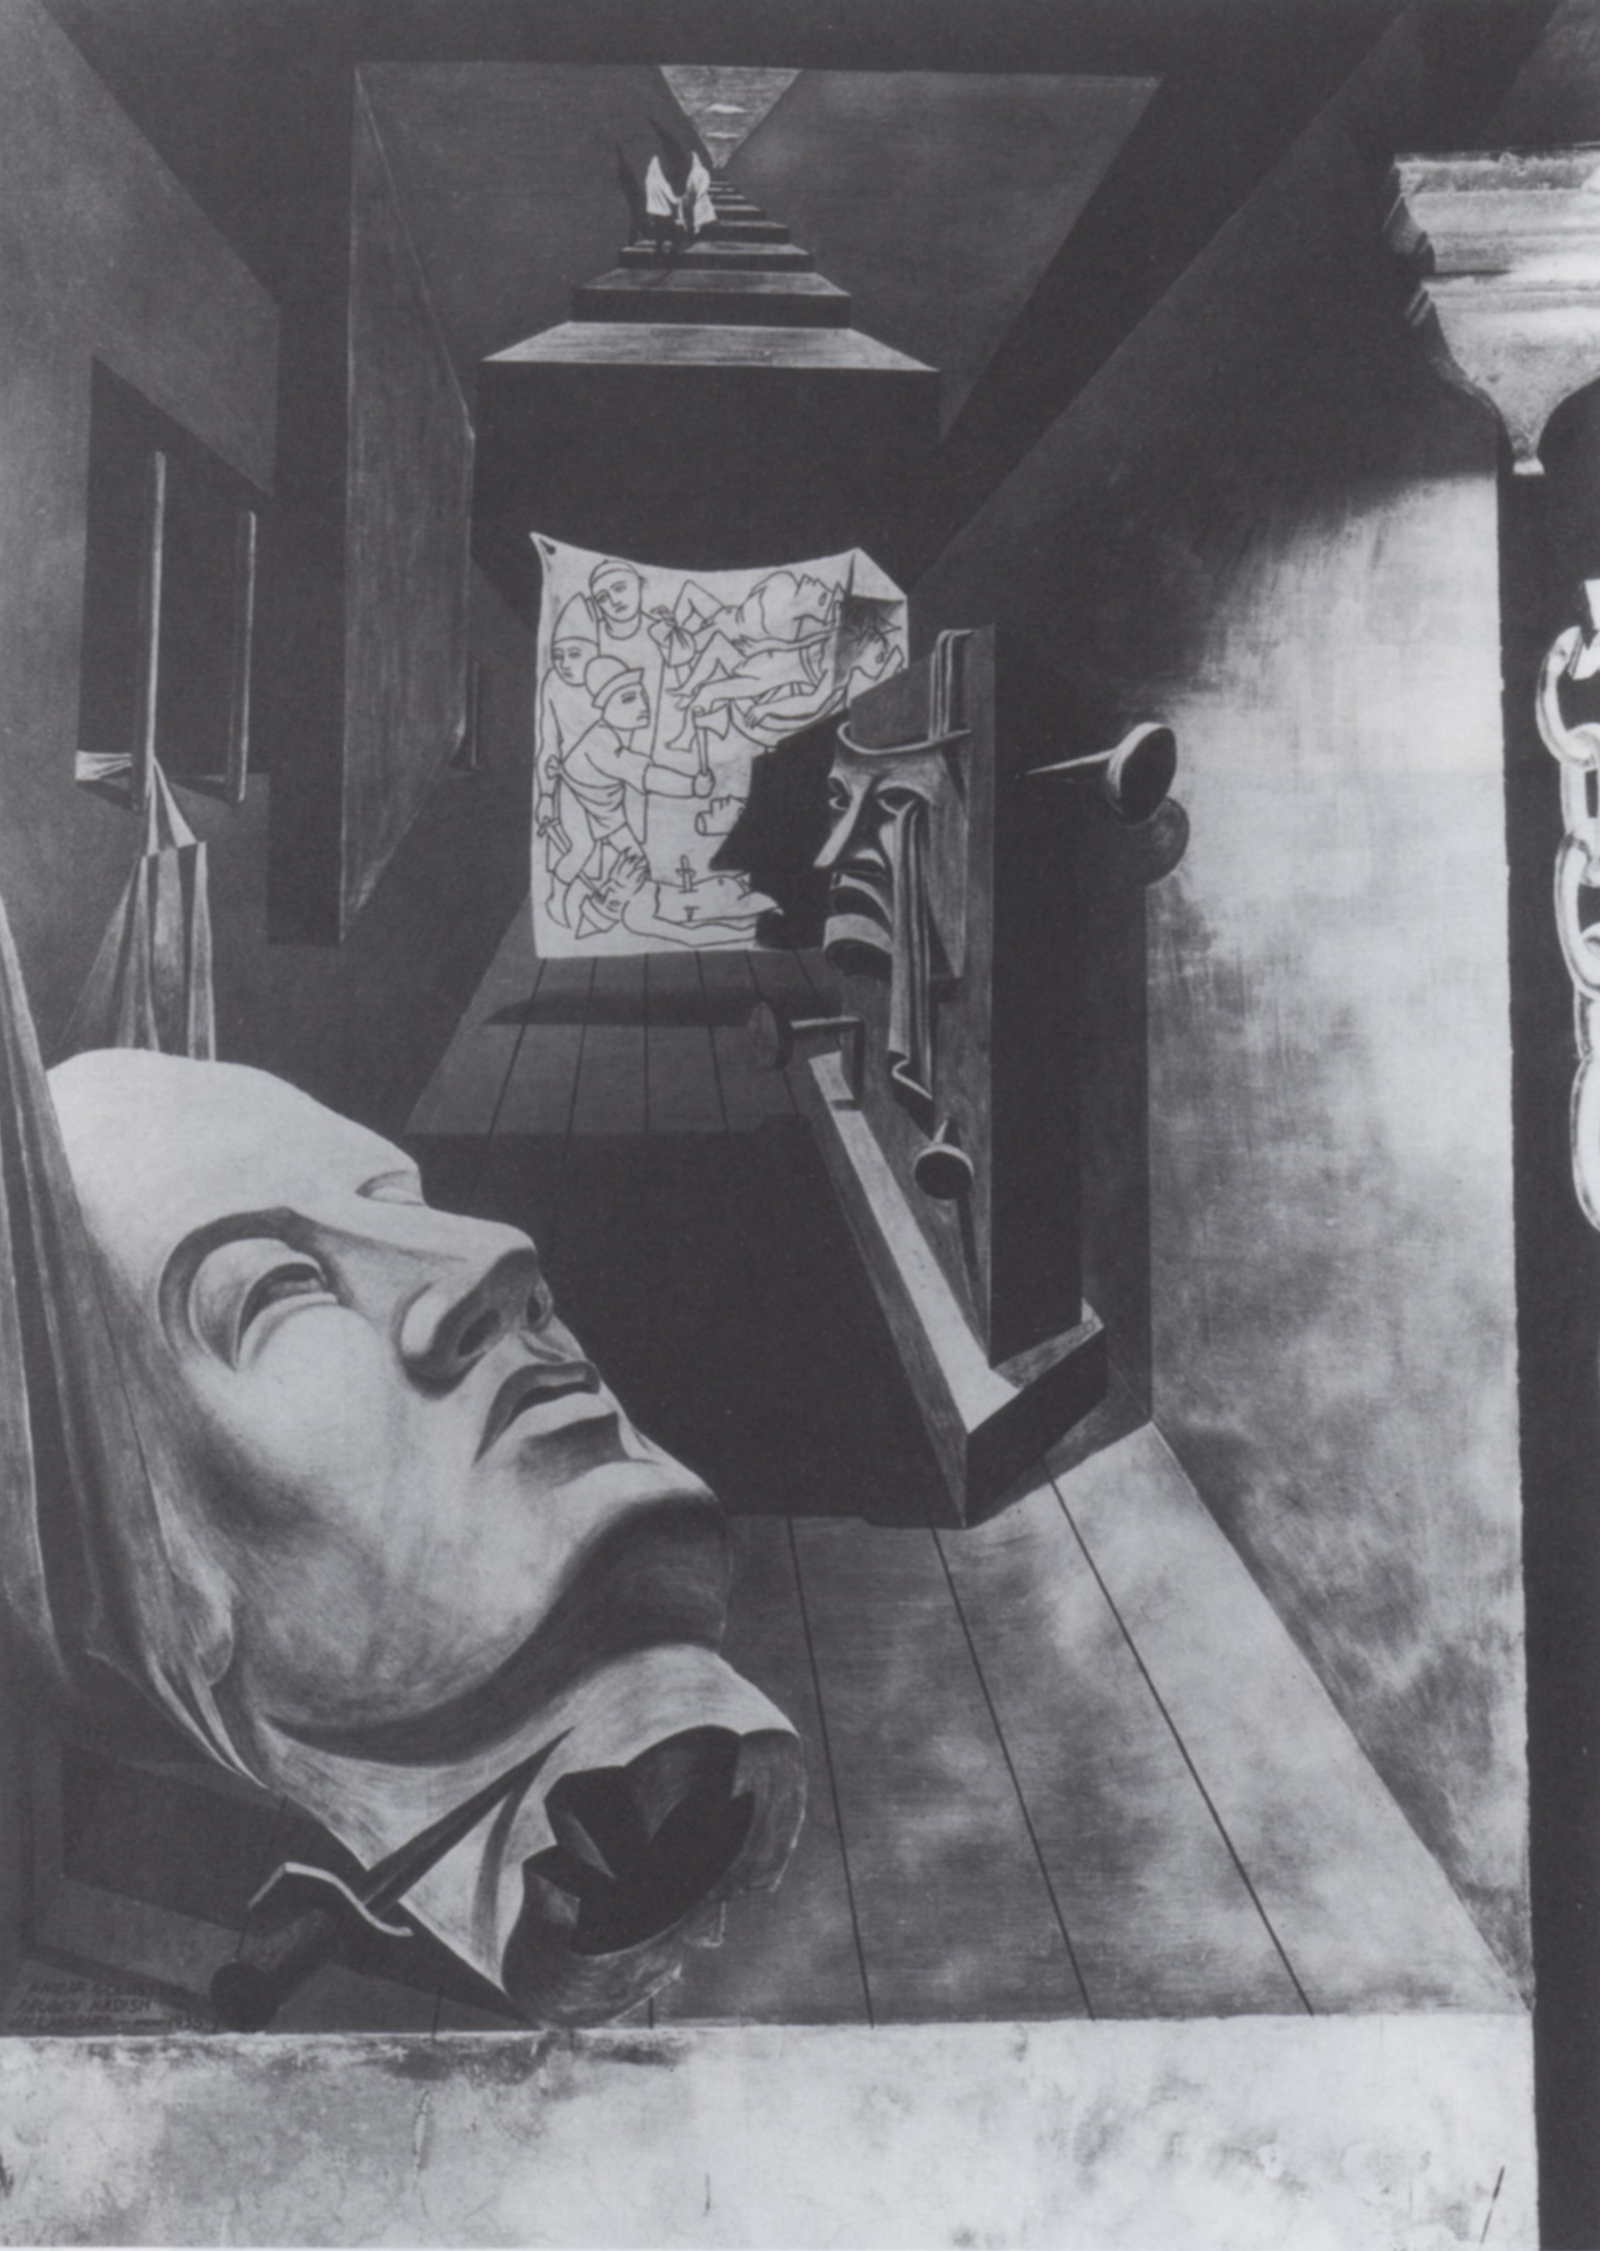 (fig. 20) Guston, Reuben Kadish (and Jules Langsner), Post-surrealist still life panel from The Struggle against Terrorism, 1934-35. Photo from the Reuben Kadish Papers, Archives of American Art, Smithsonian Institution, with permission of the Reuben Kadish Art Foundation